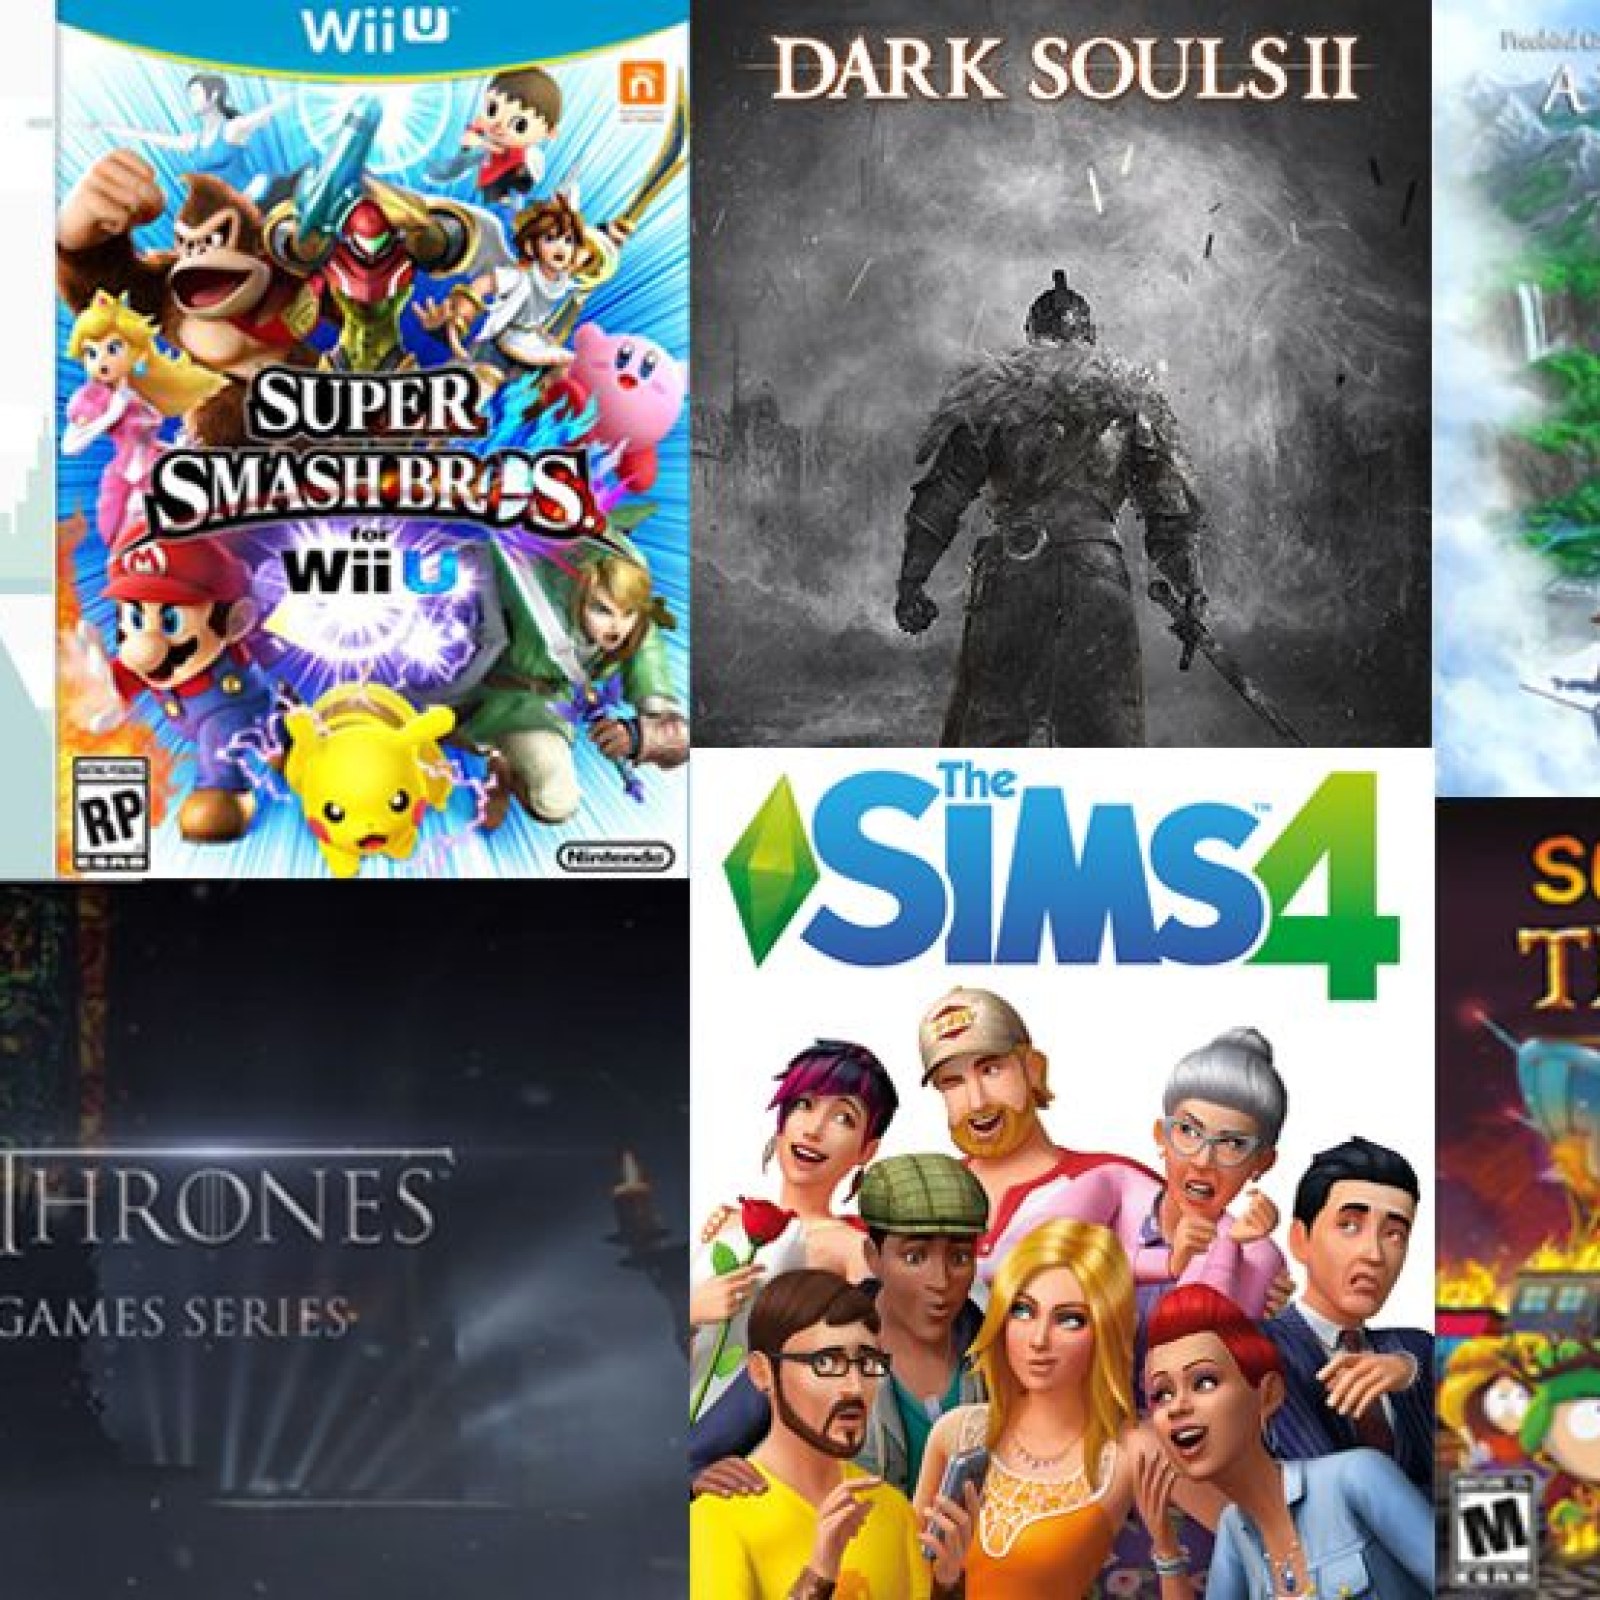 The Top 10 Games of the Year 2014